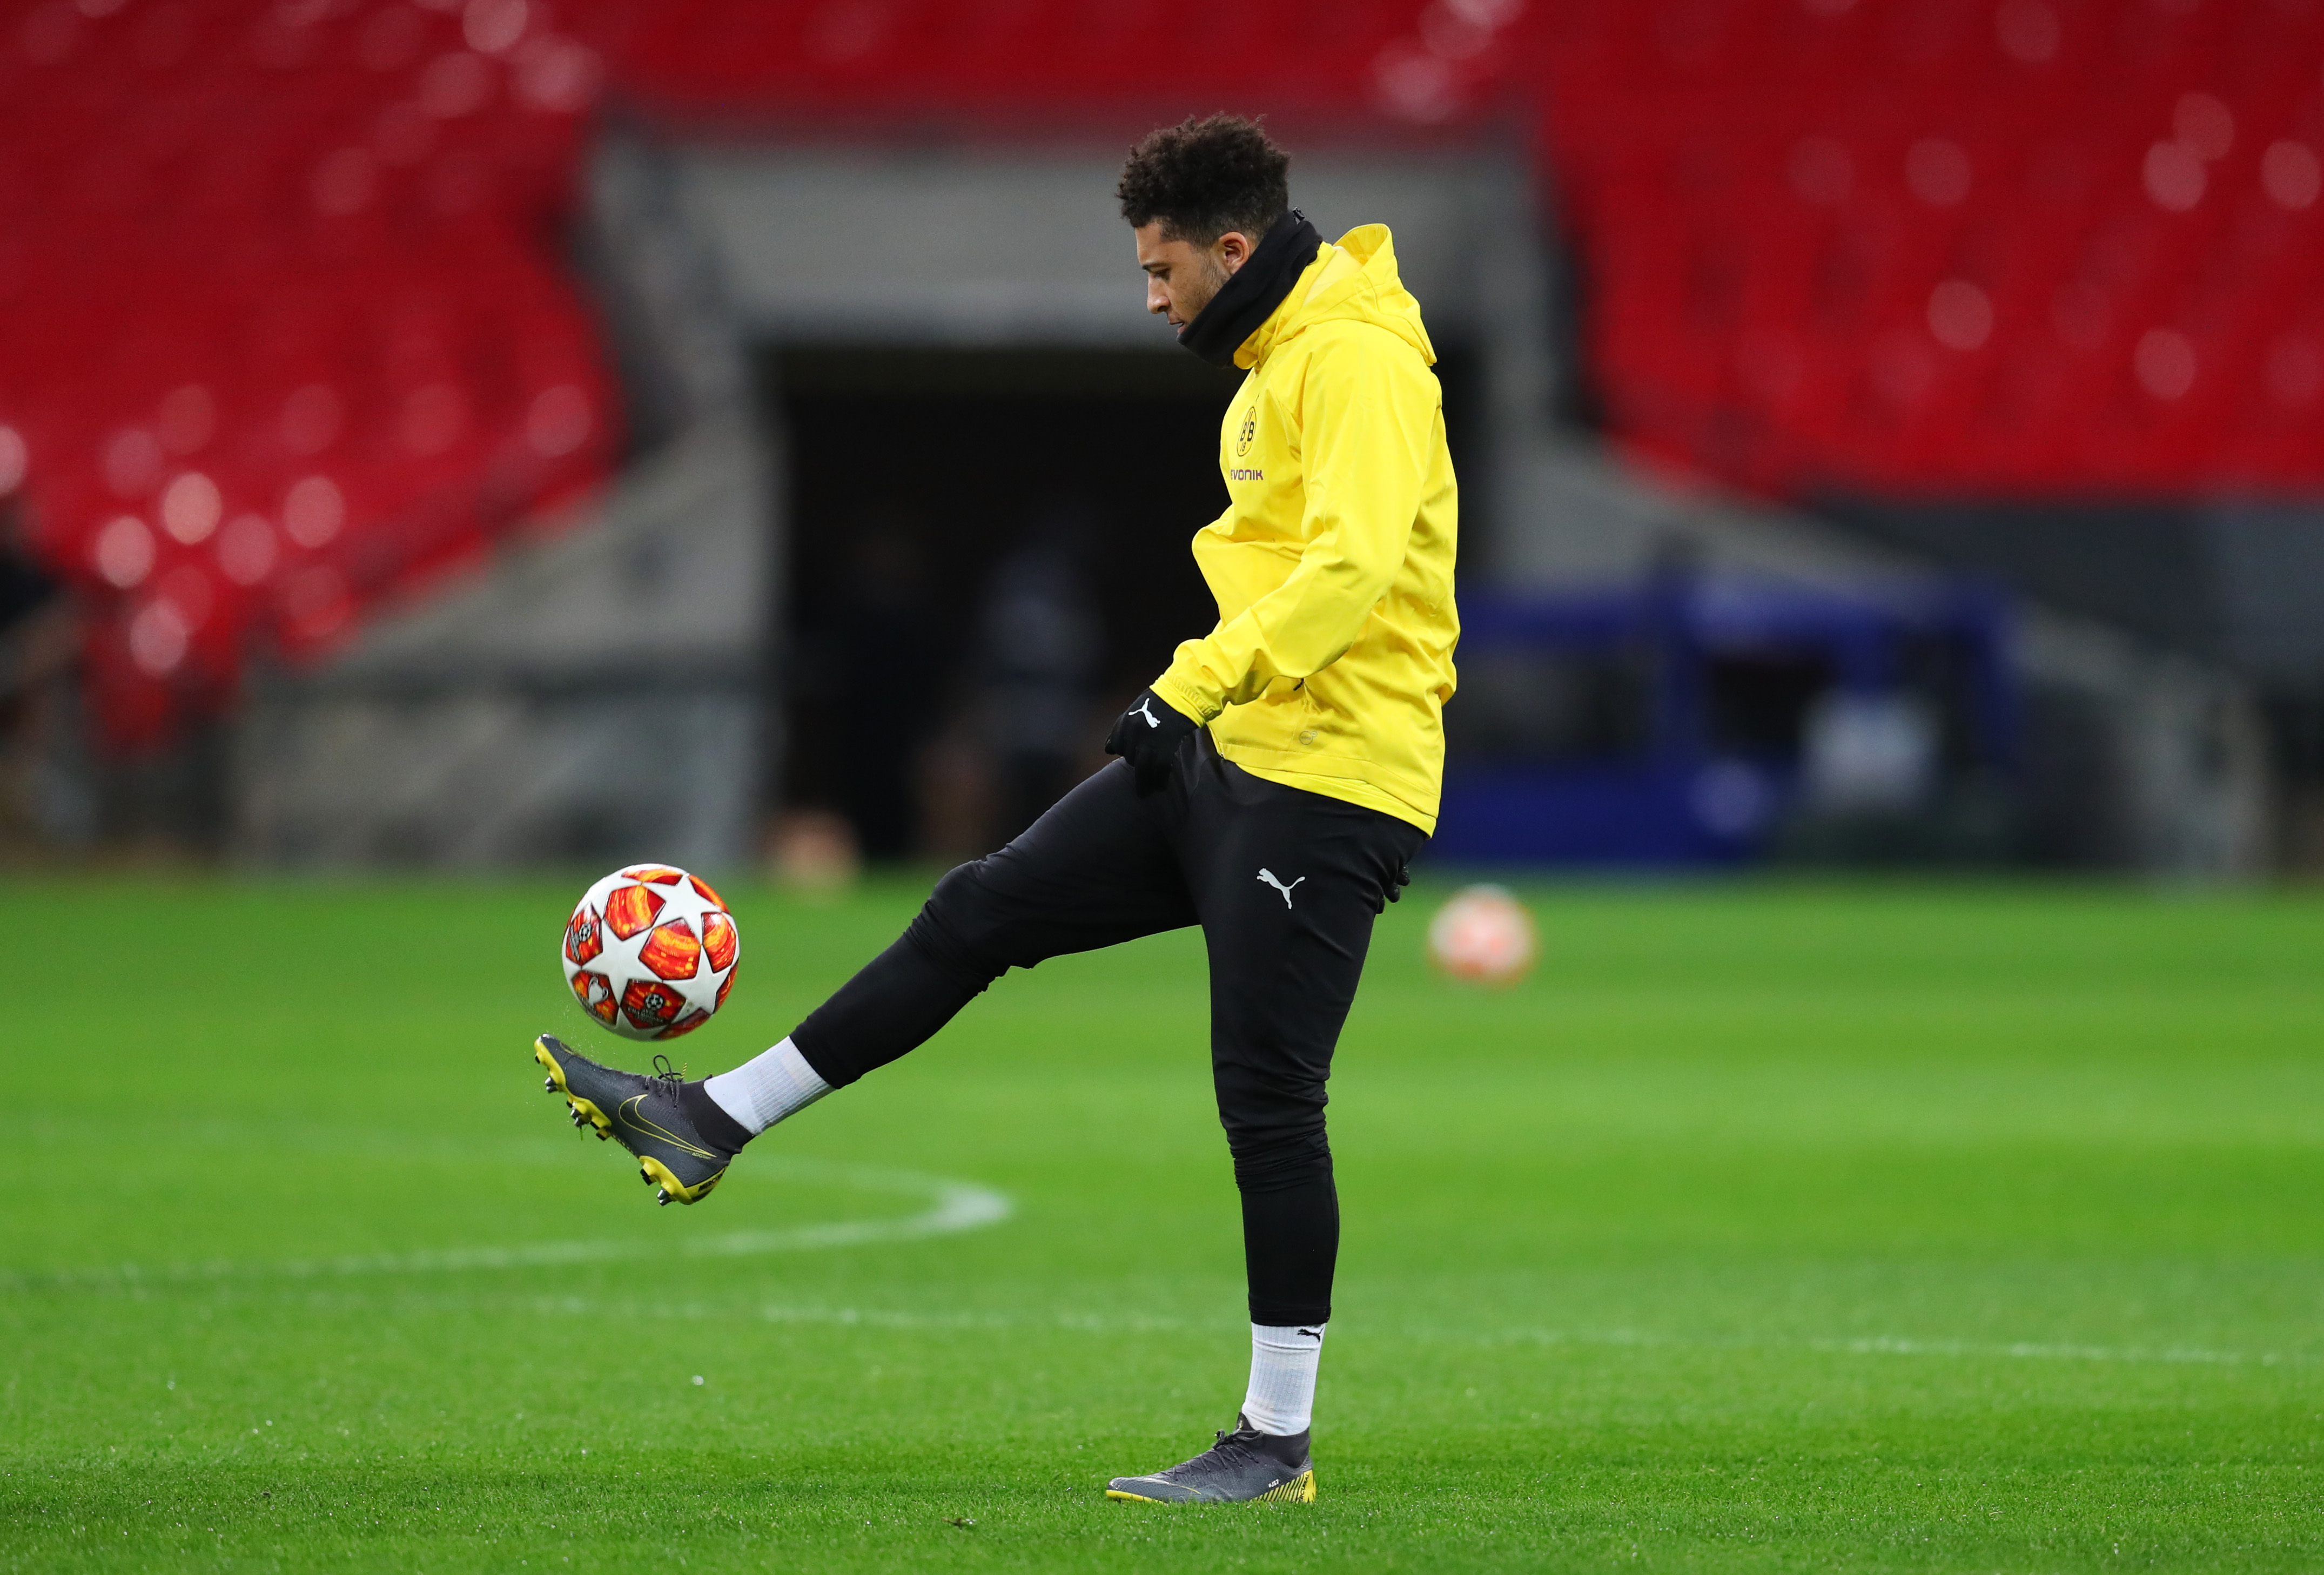 LONDON, ENGLAND - FEBRUARY 12:  Jadon Sancho juggles the ball during a Borussia Dortmund training session at Wembley Stadium on February 12, 2019 in London, England. (Photo by Catherine Ivill/Getty Images)